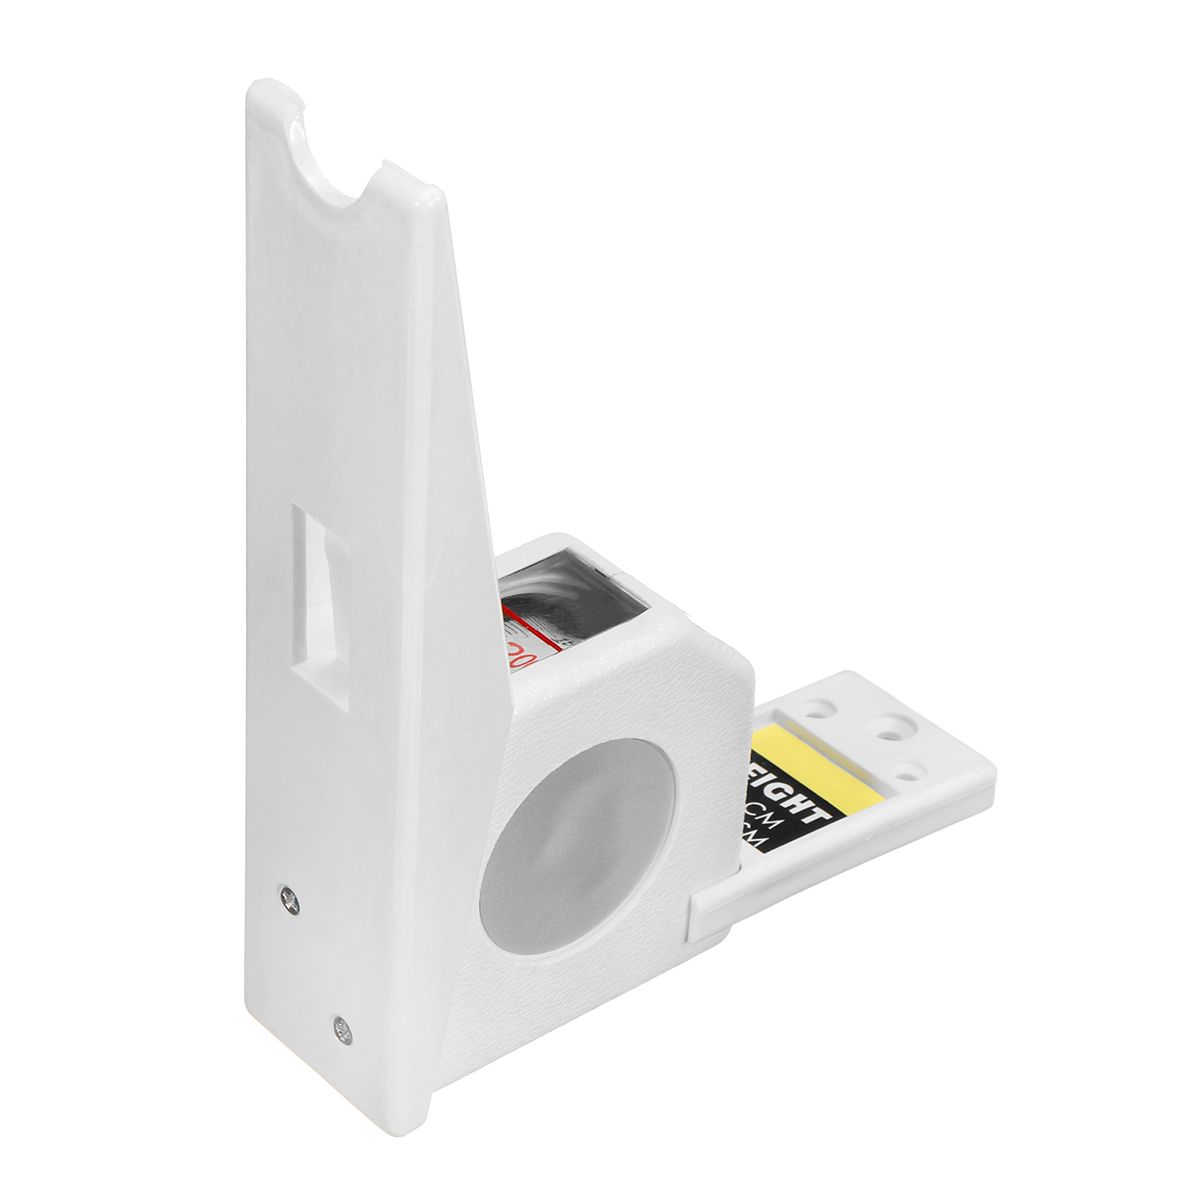 200cm-Roll-Ruler-Wall-Mounted-Height-Stadiometer-Measure-Metering-Tape-Tool-White-1351363